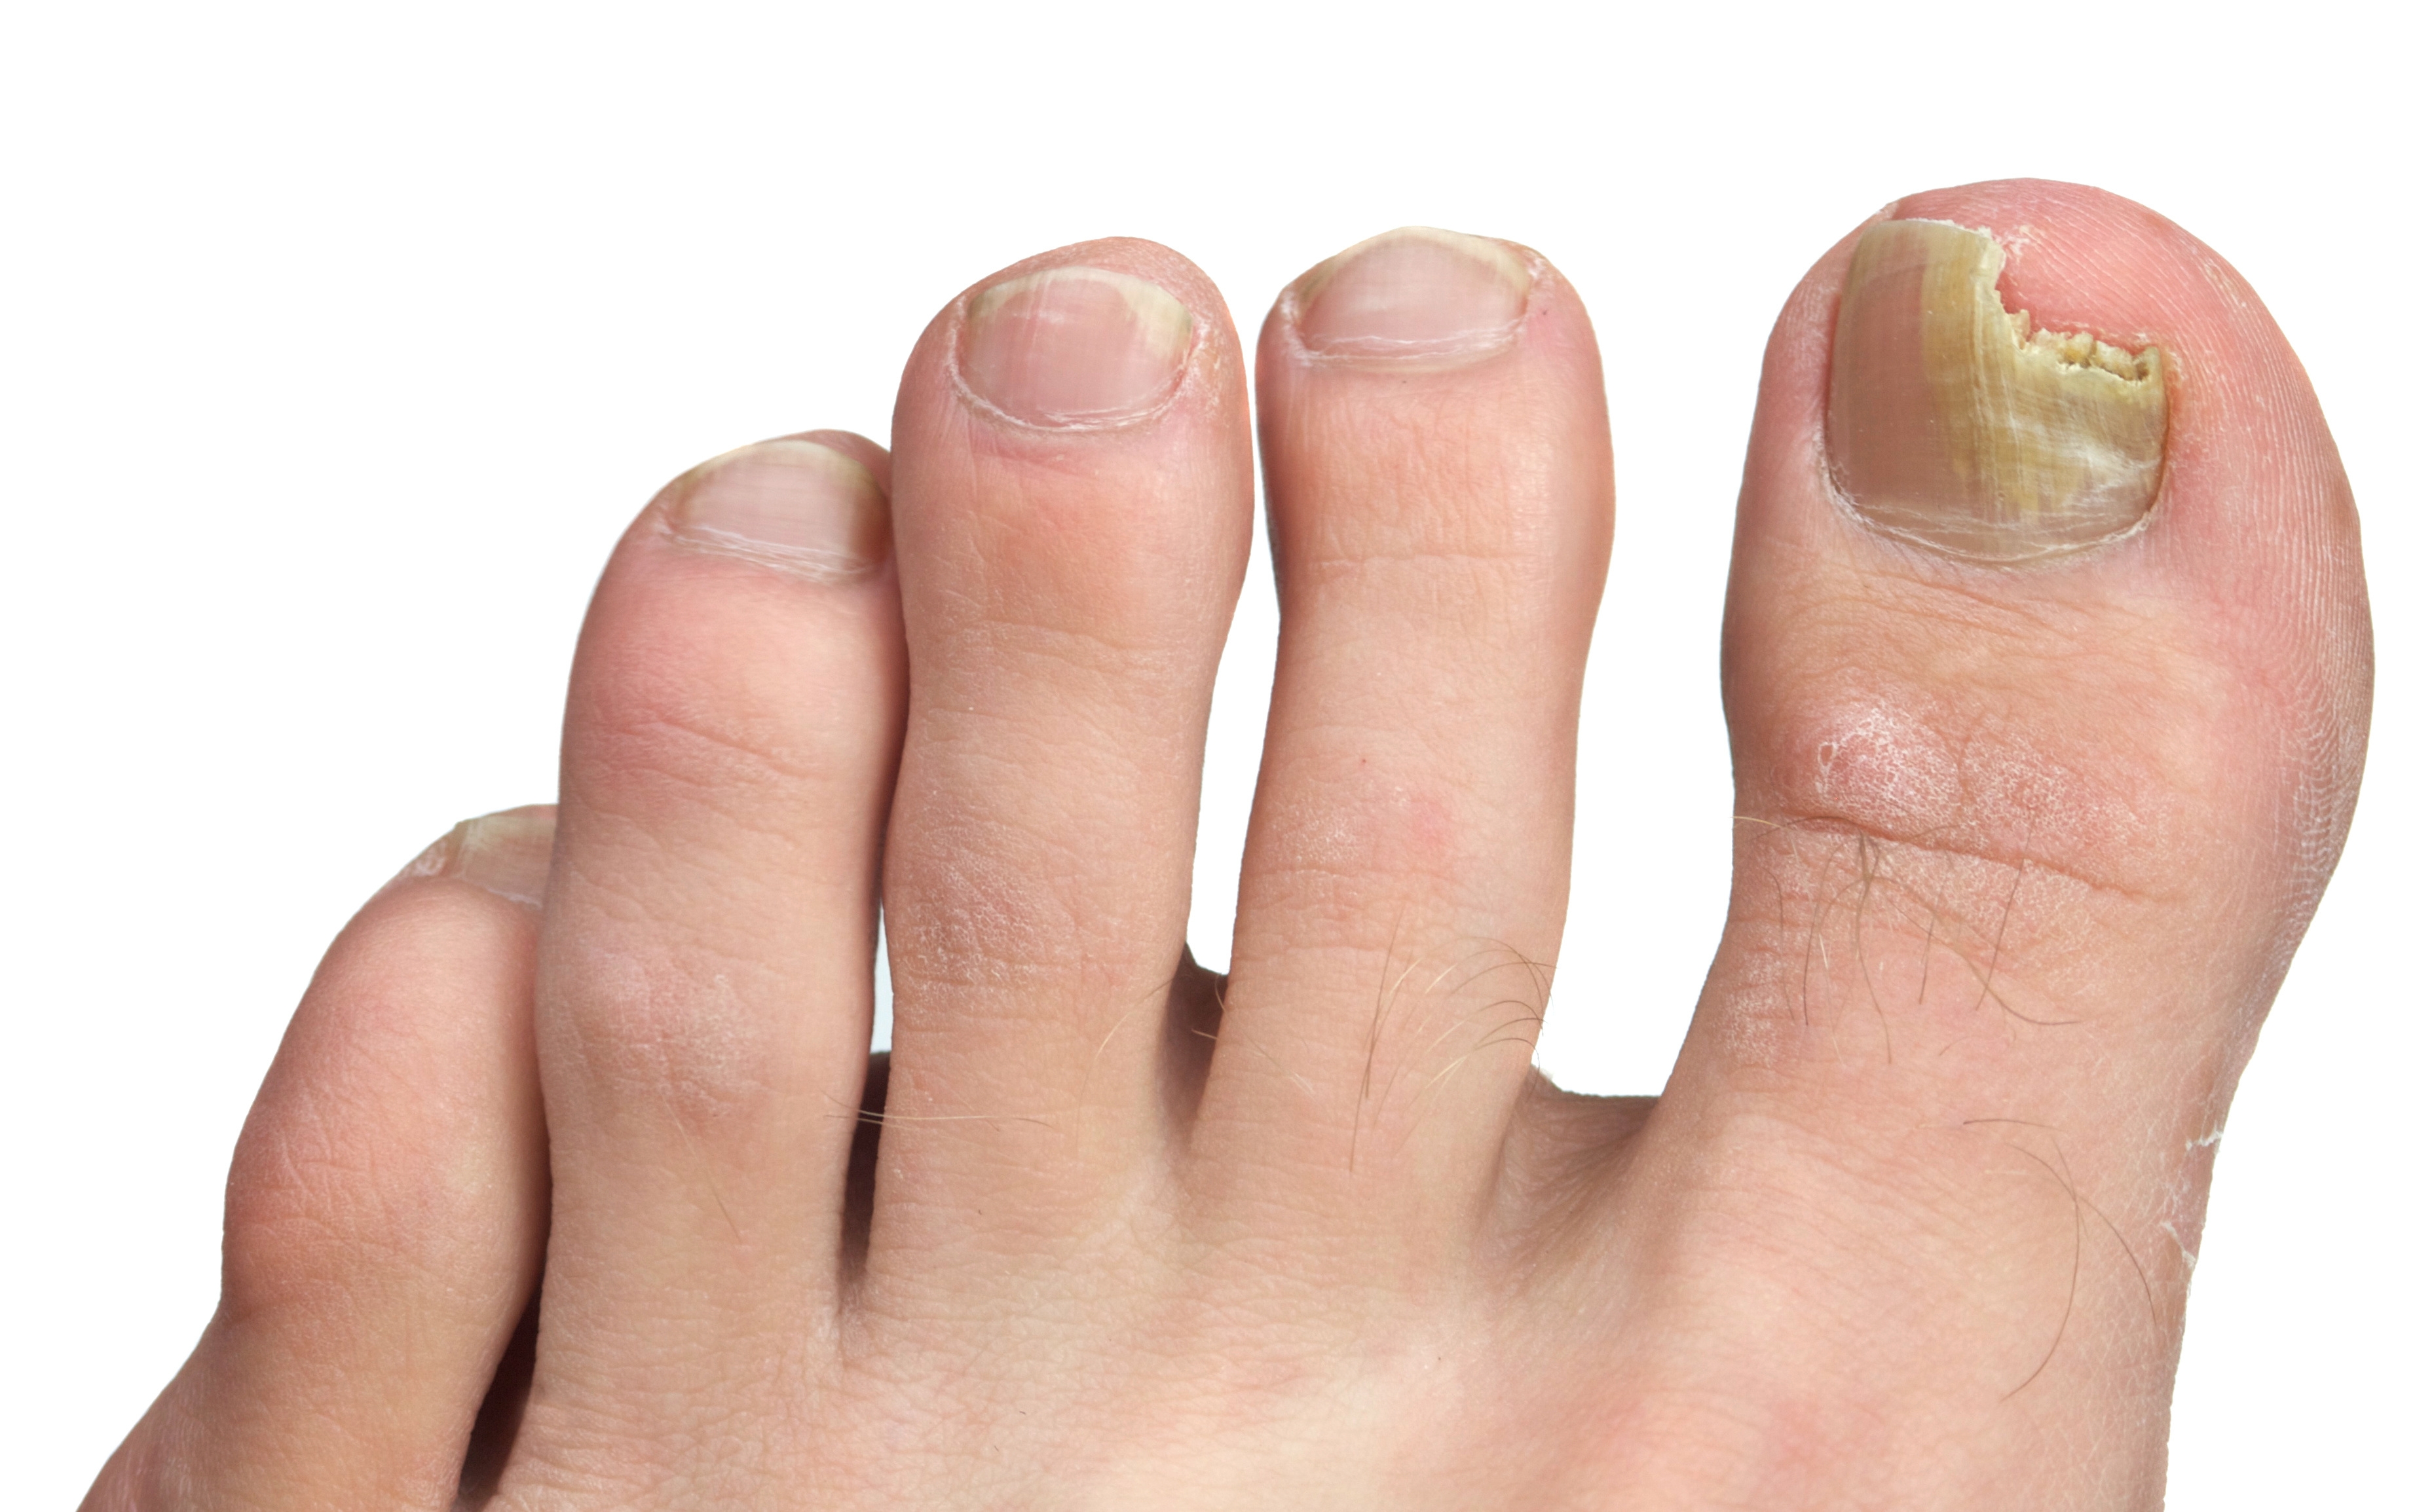 Nail Fungus an infection to be treated